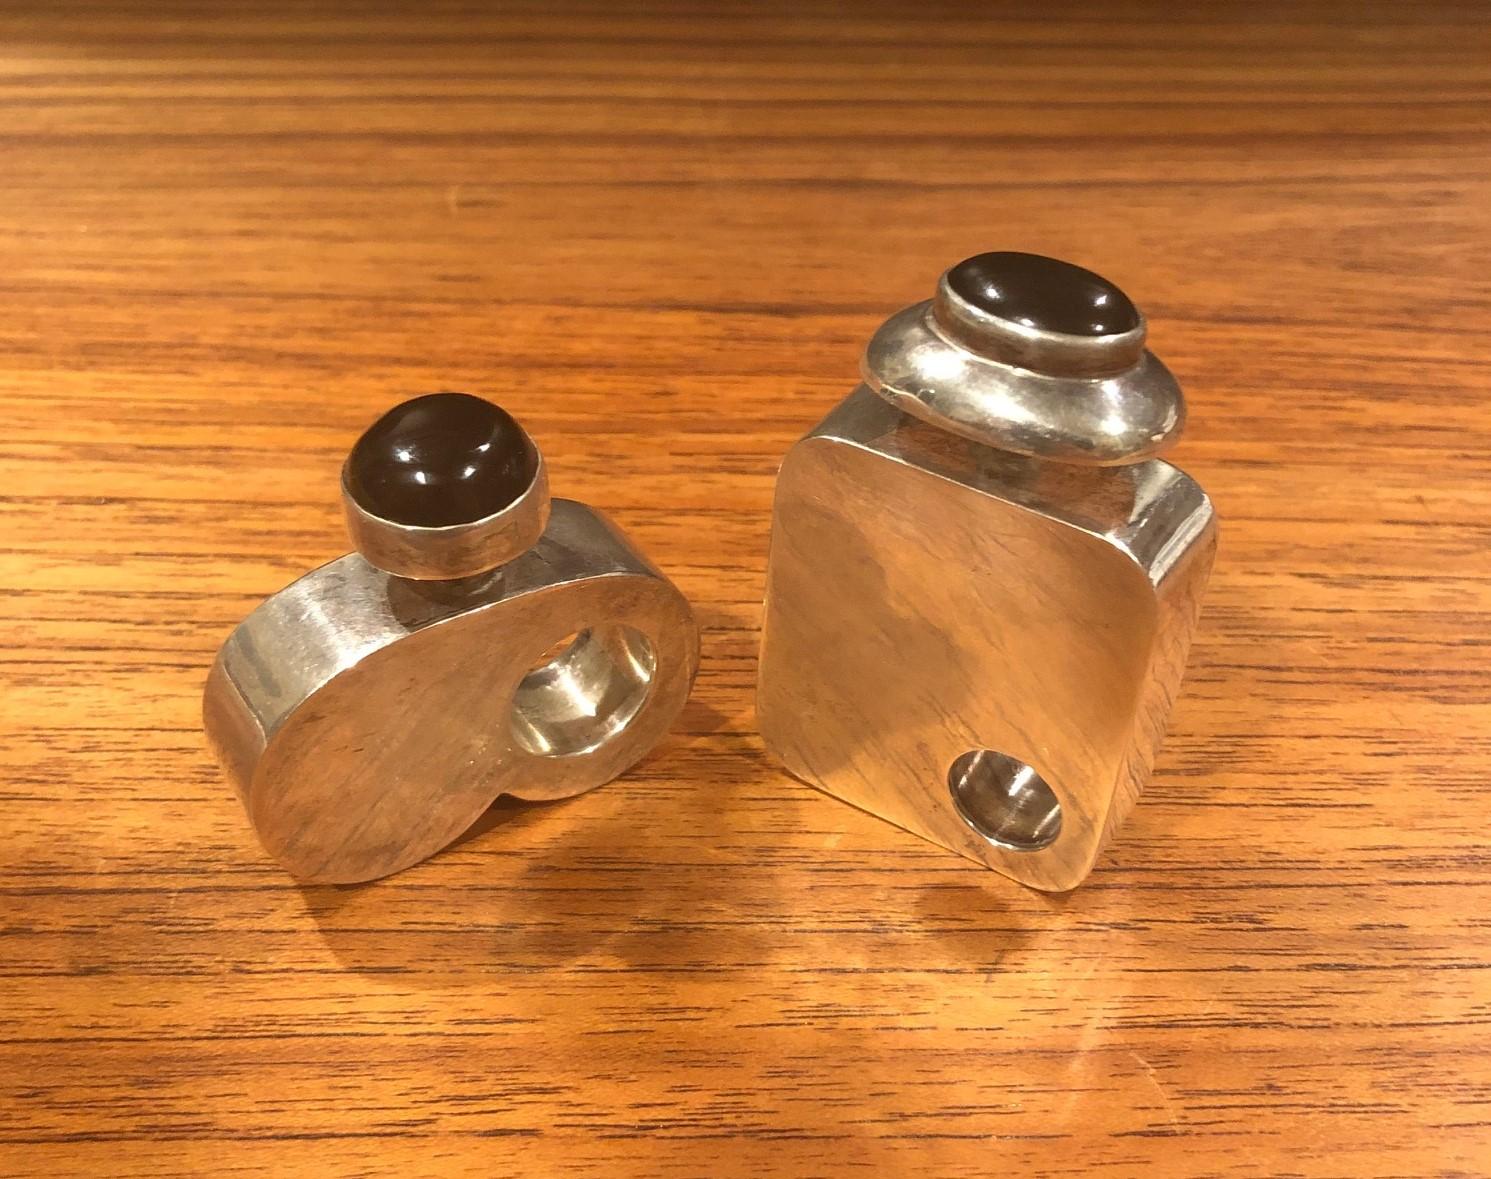 Pair of modernist sterling silver perfume bottles from Taxco, Mexico, circa 1980s.

The bottles have an elegant modernist design in a heavy gauge of sterling silver with faceted onyx top. The larger bottle is marked 